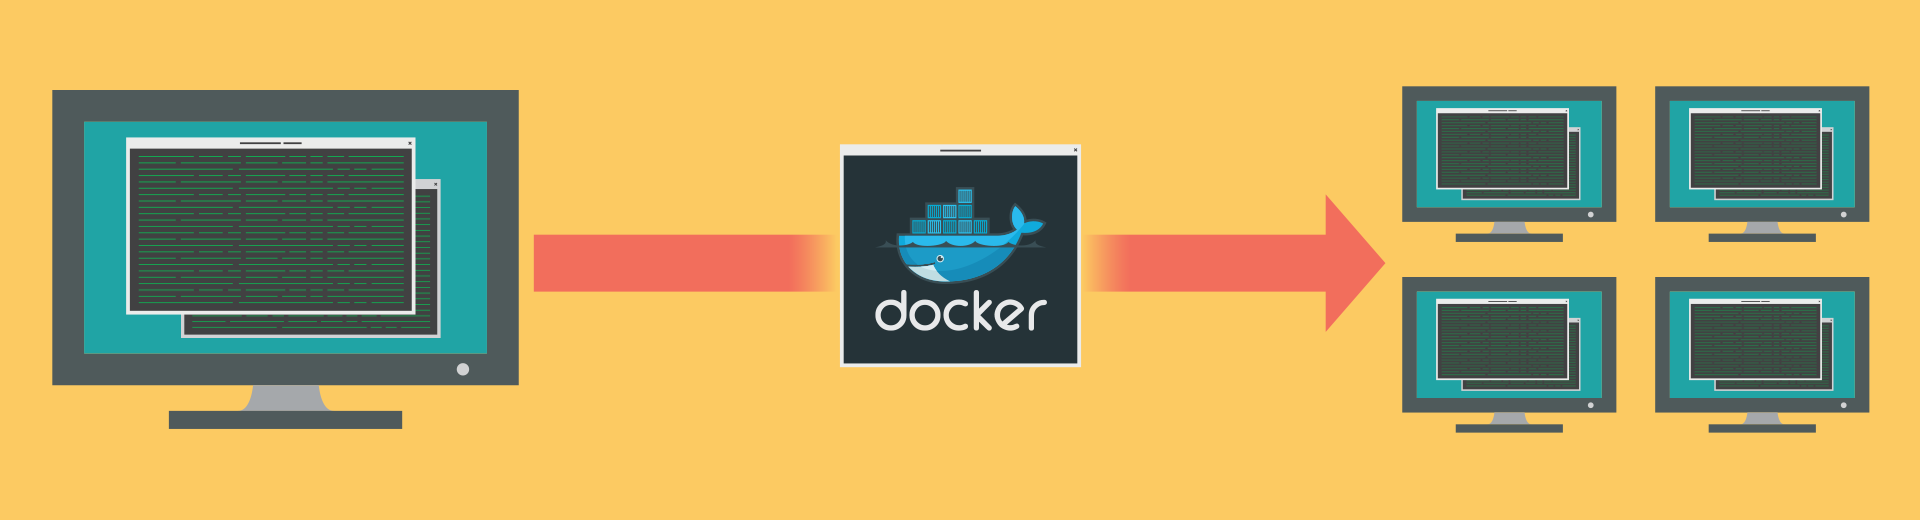 An arrow that goes from a computer showing code, to the Docker logo, to four identical computers showing code